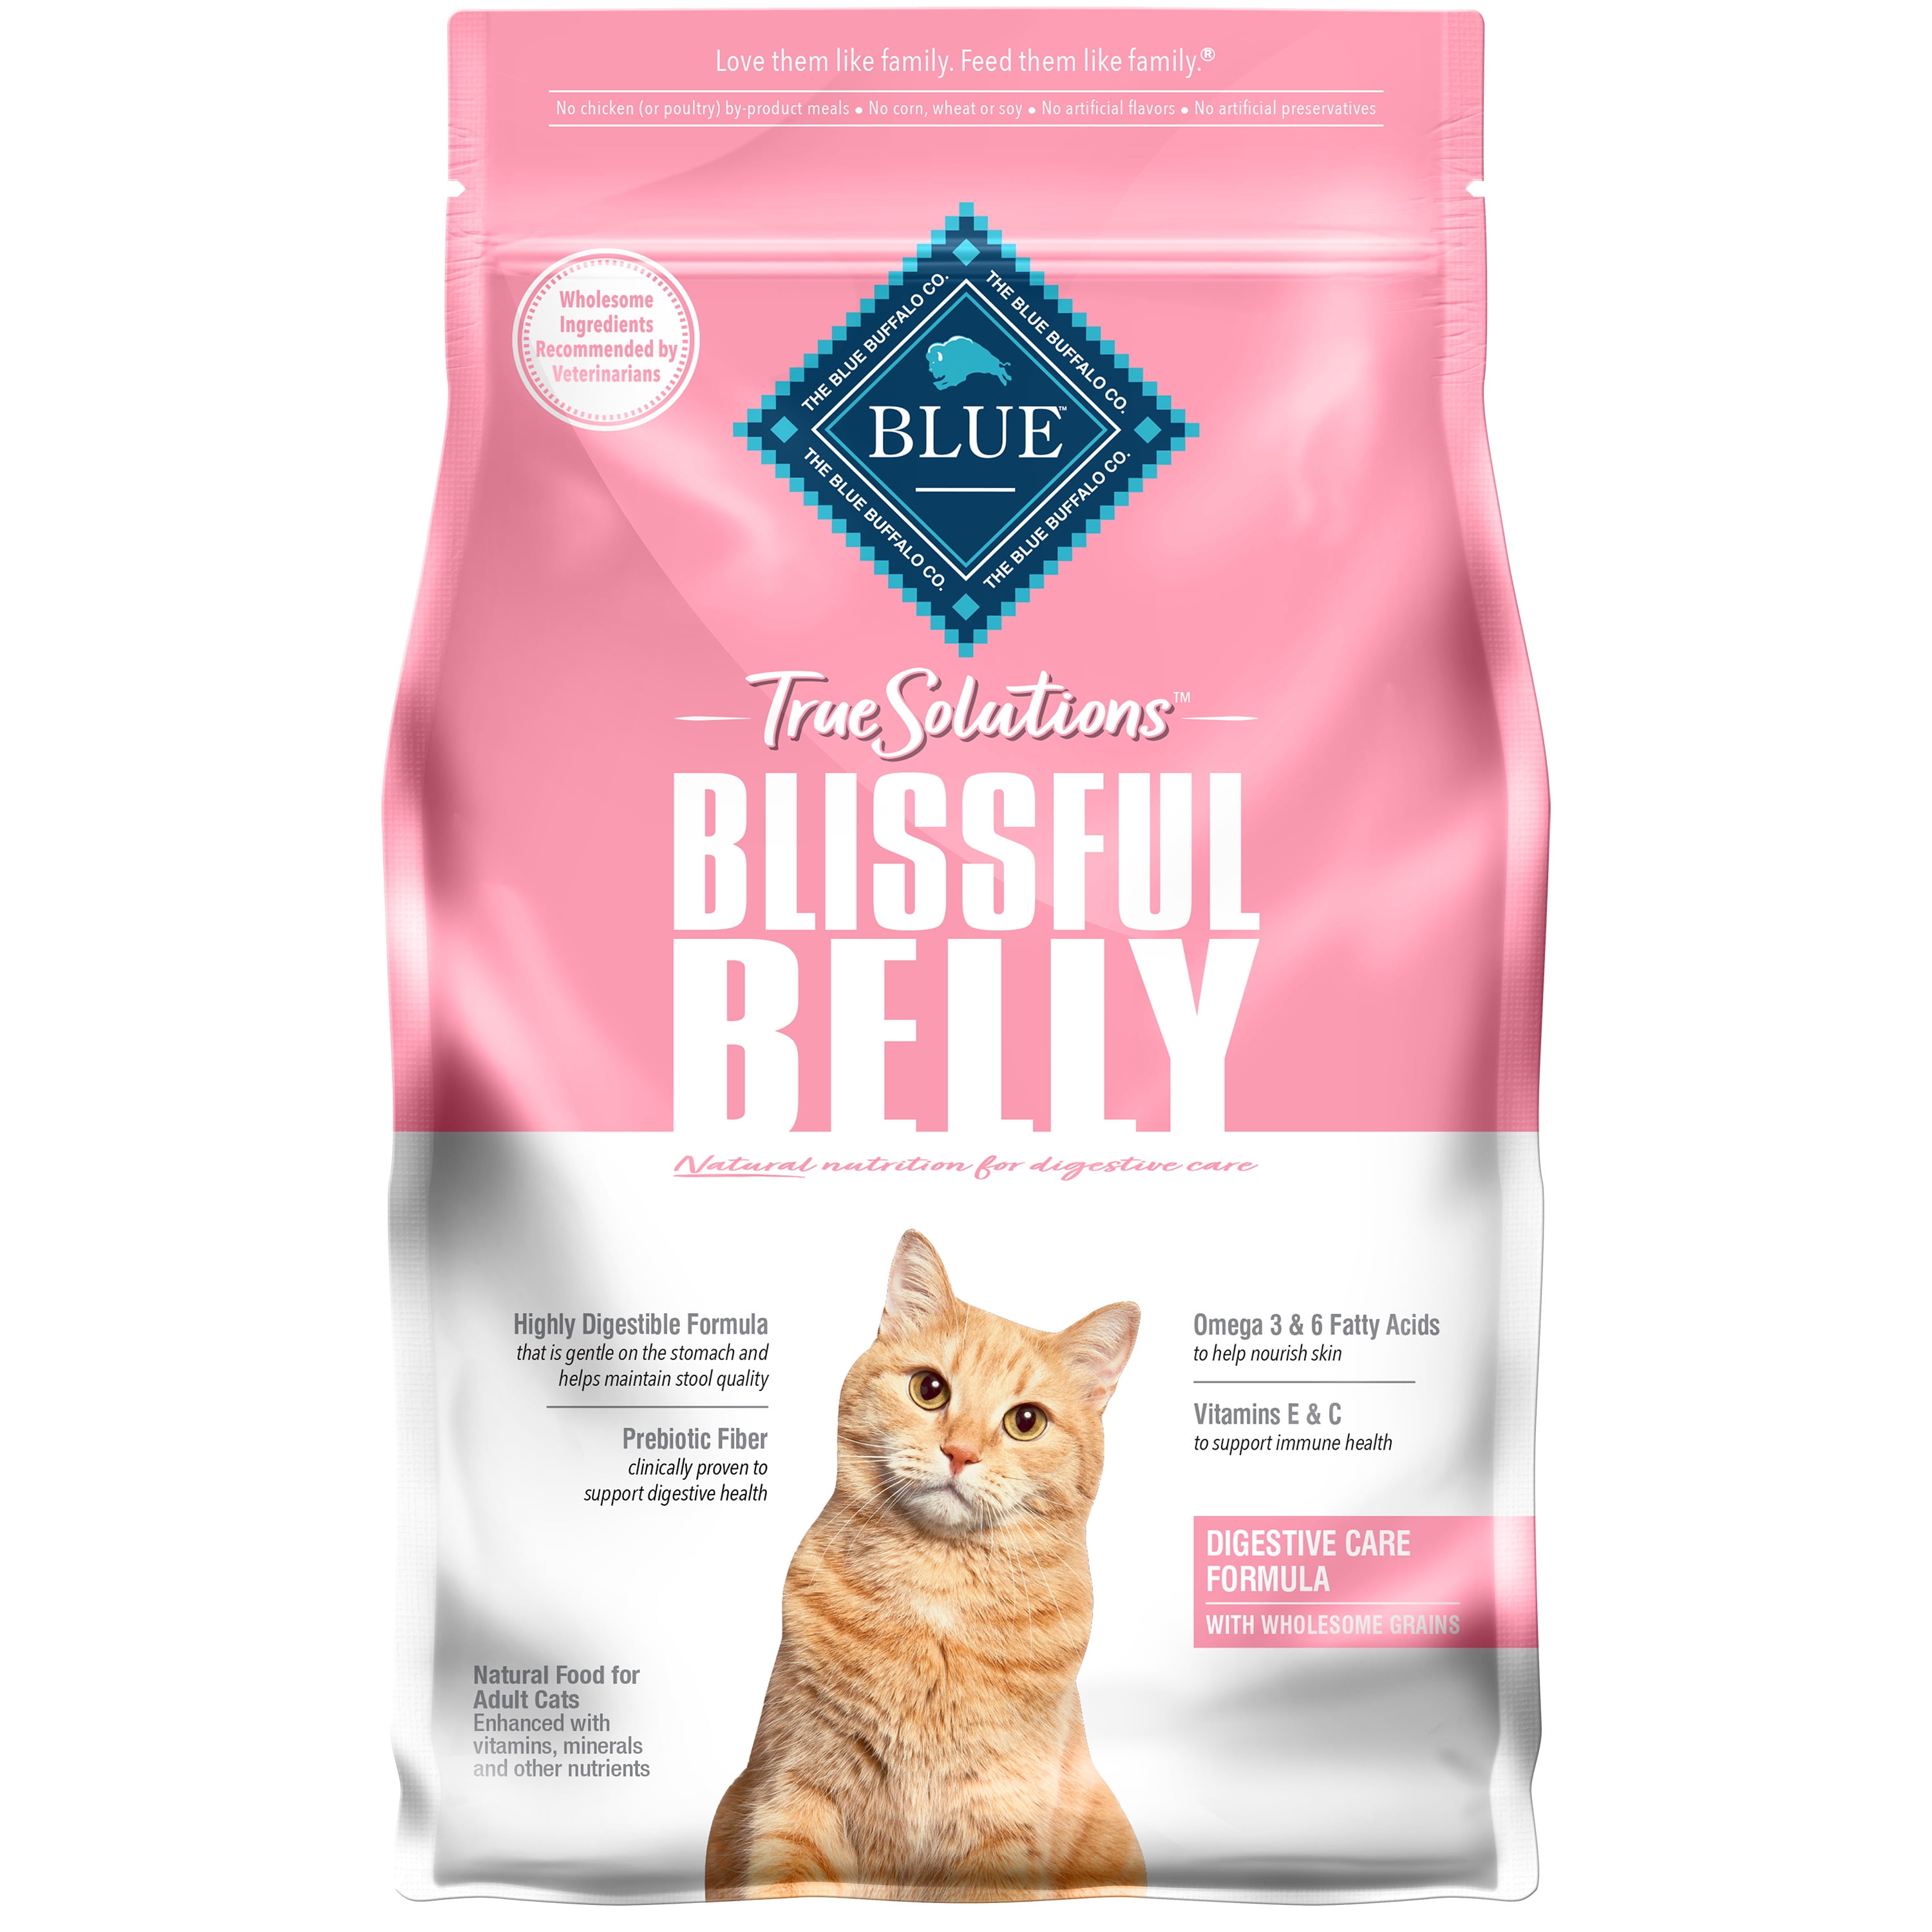 Blue Buffalo True Solutions Blissful Belly Digestive Care Chicken Dry Cat Food for Adult Cats, Whole Grain, 3.5 lb. Bag